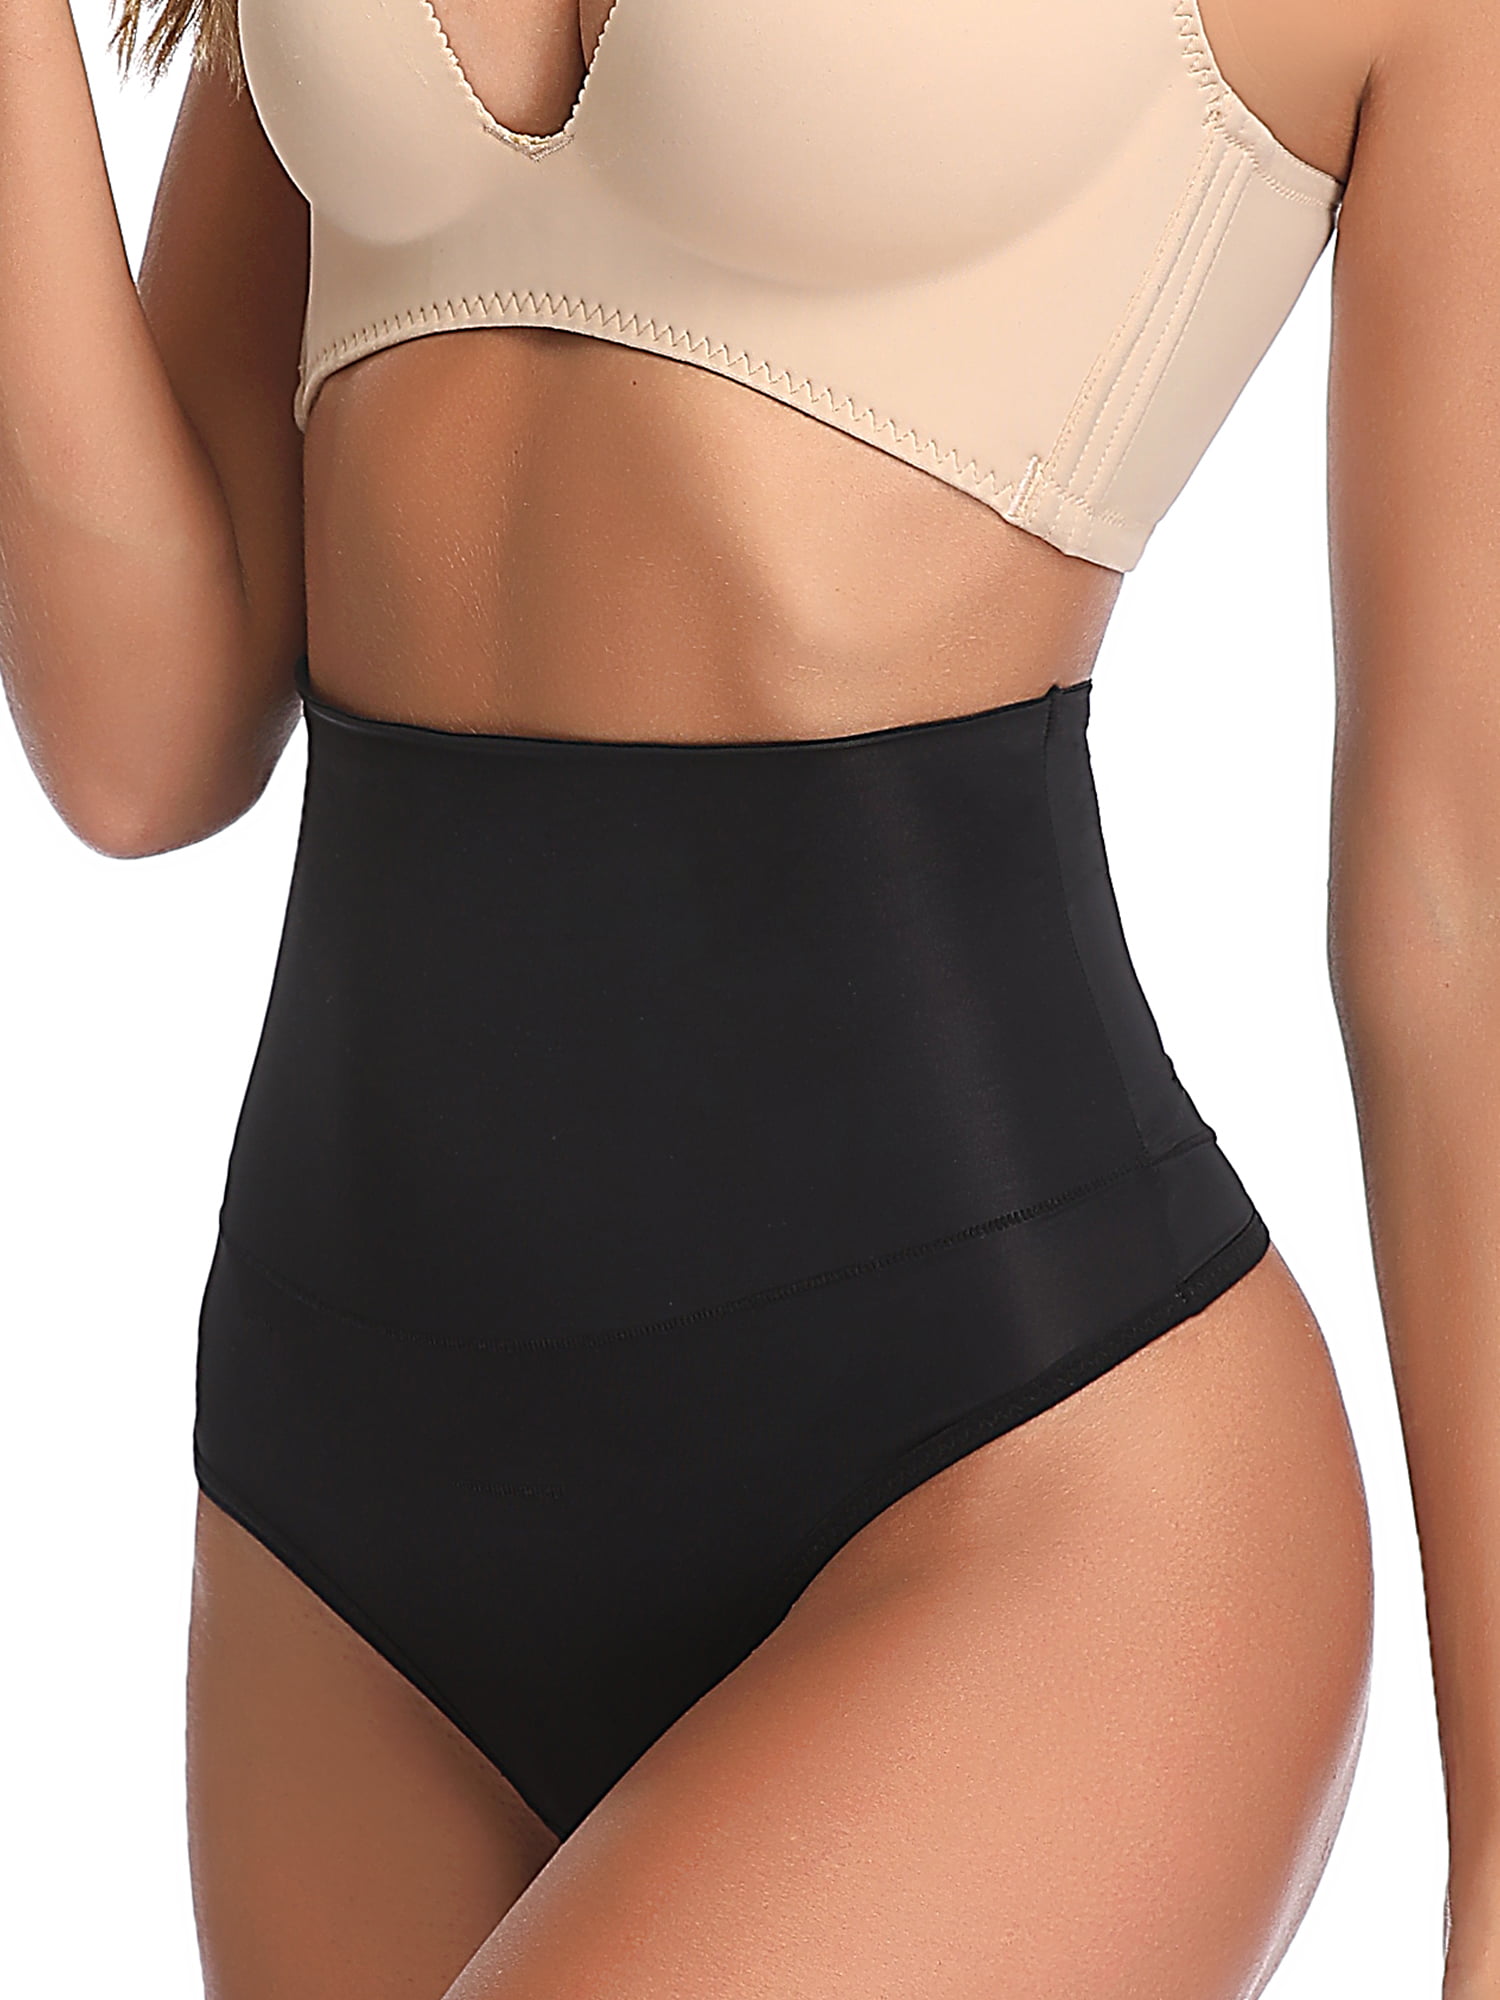 Angxiwan Tummy Control Thong Shapewear for Women Far Infrared Negative  Oxygen High Waisted Body Shaper Panties Underwear at  Women's  Clothing store